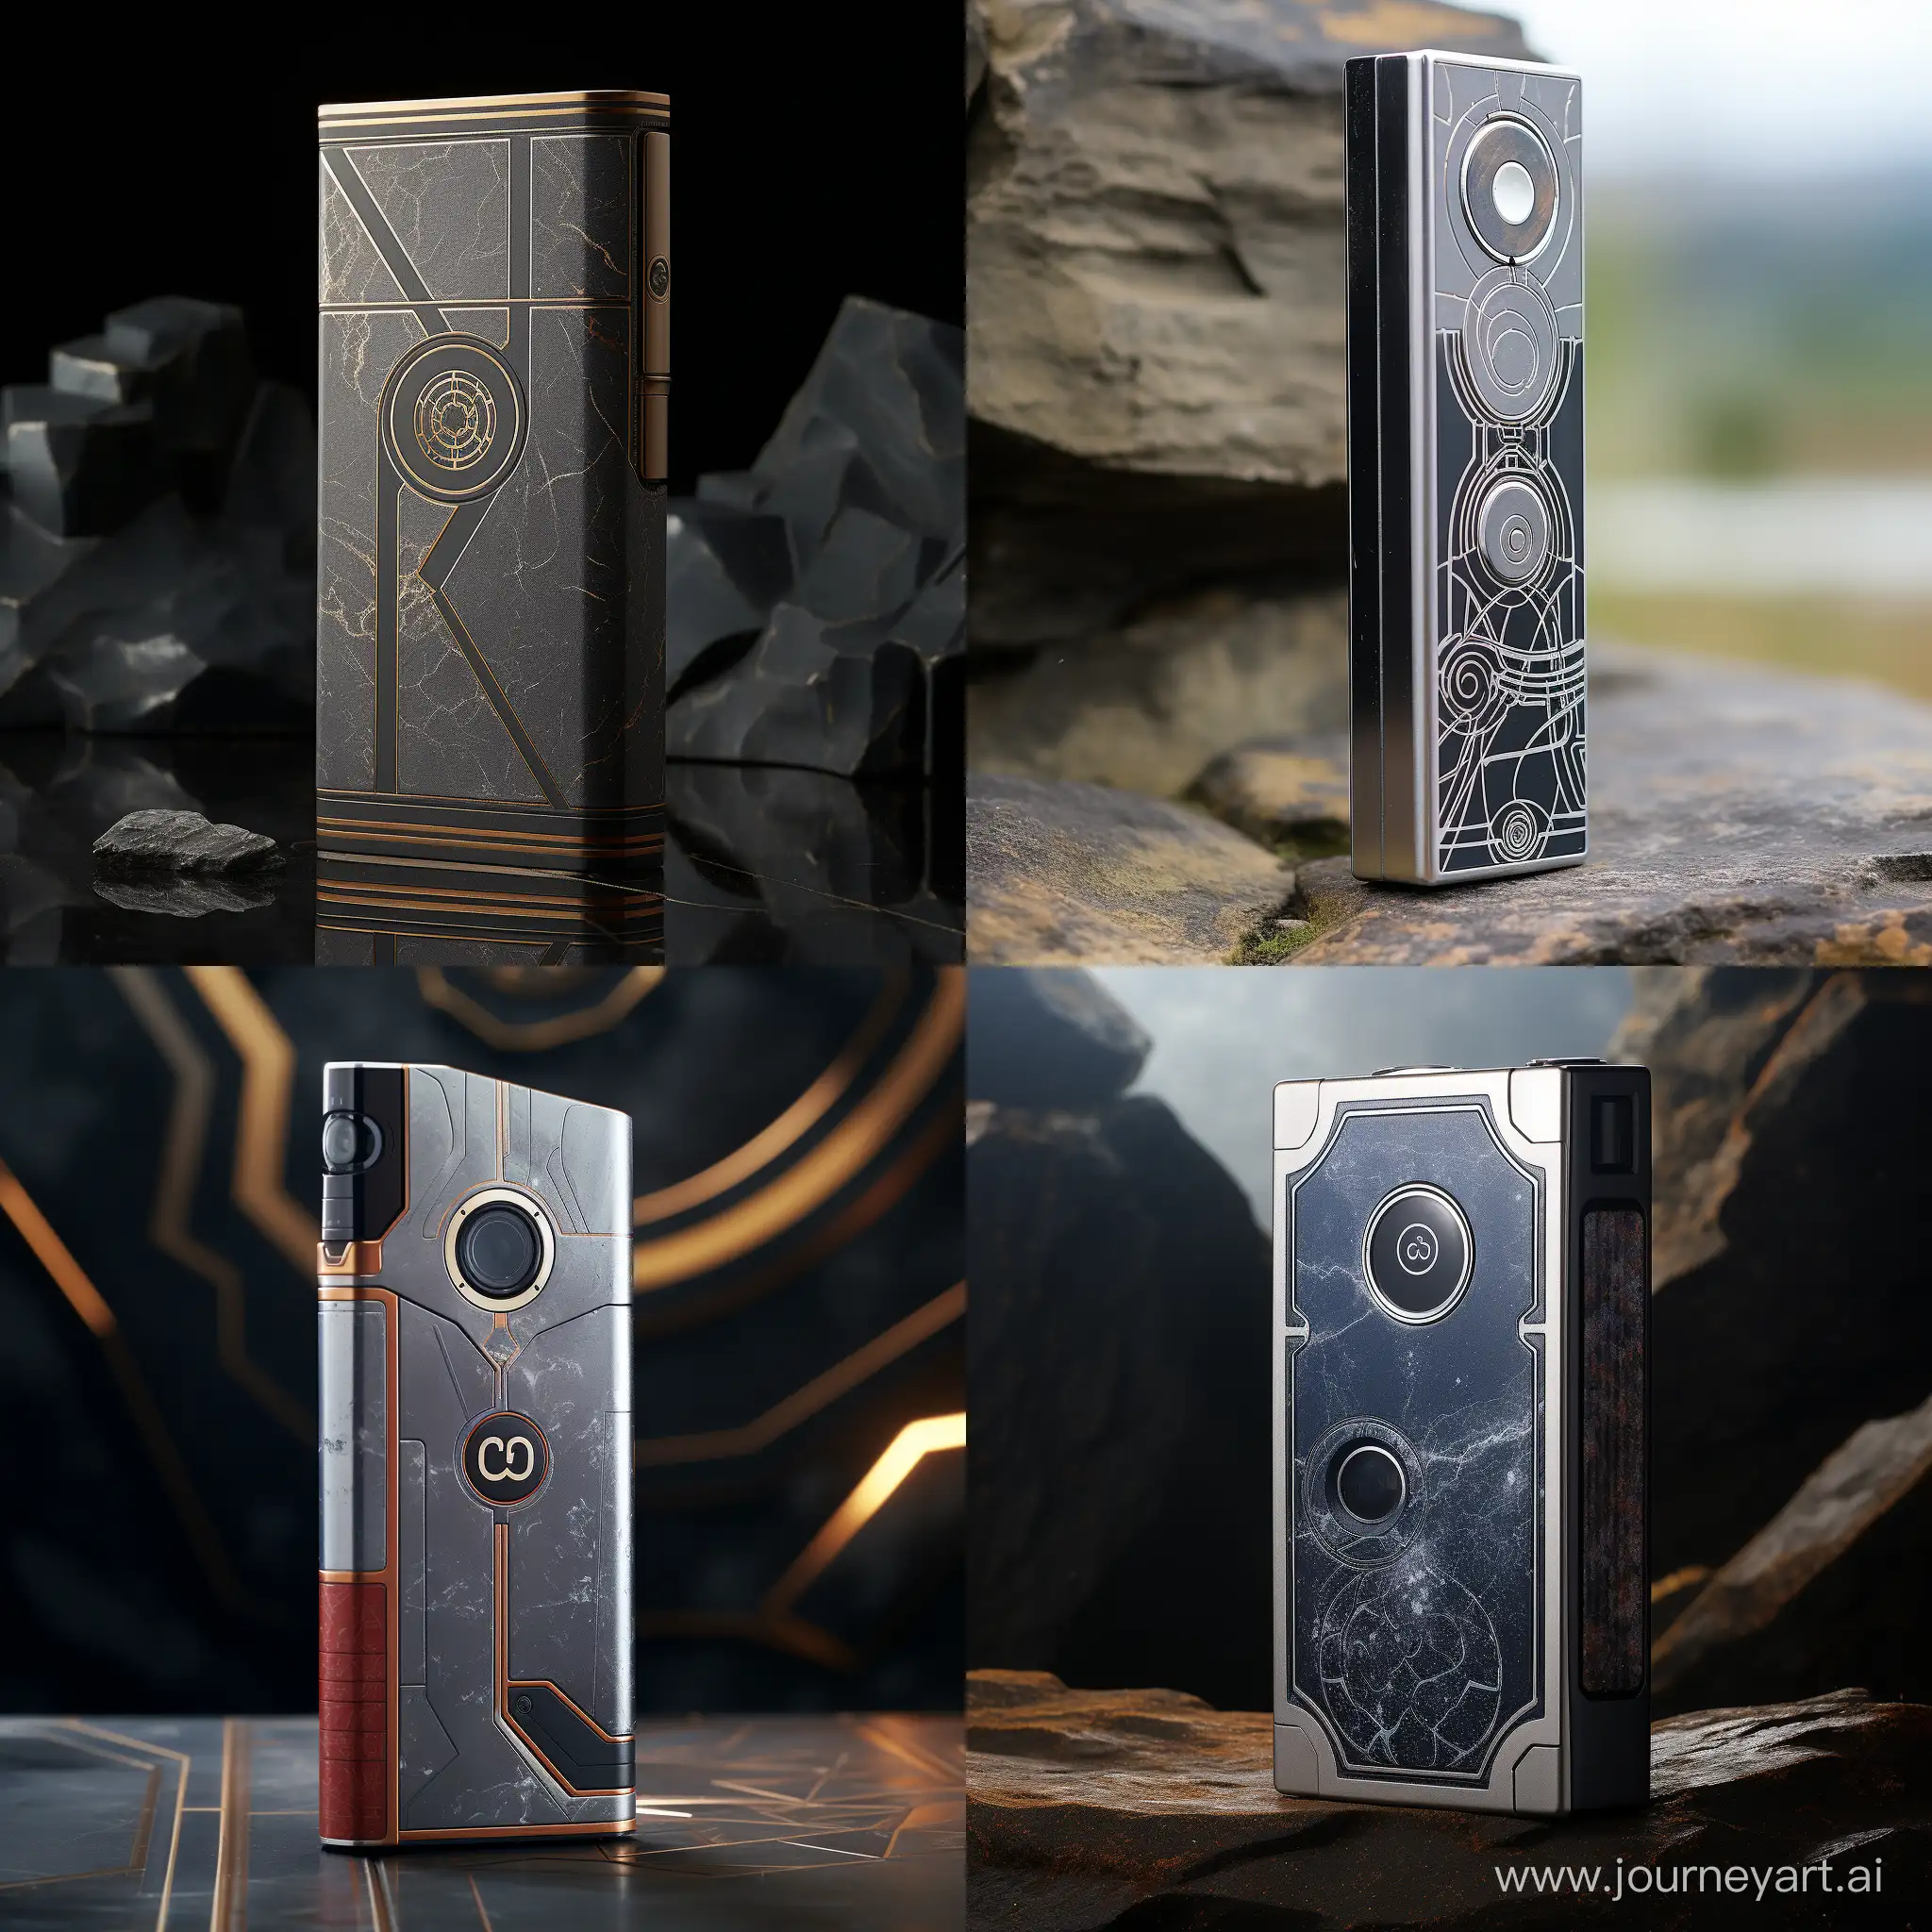 The Force was strong with this vaping device, a sleek and silver square case adorned with intricate etchings reminiscent of a galaxy far, far away. It lay atop the cold stone tiles, its presence commanding attention and respect. The power within the vape was unlike any other, its vapor swirling and curling in a mesmerizing dance, as if it held the secrets of the universe itself. With a simple puff, the user was transported to a realm of flavor and satisfaction, a journey through the stars that only the chosen ones could embark upon. As the vapor dissipated into the air, the vape rested on the stone tiles, a silent guardian of the Force, ready to be wielded once more by the chosen vaper.